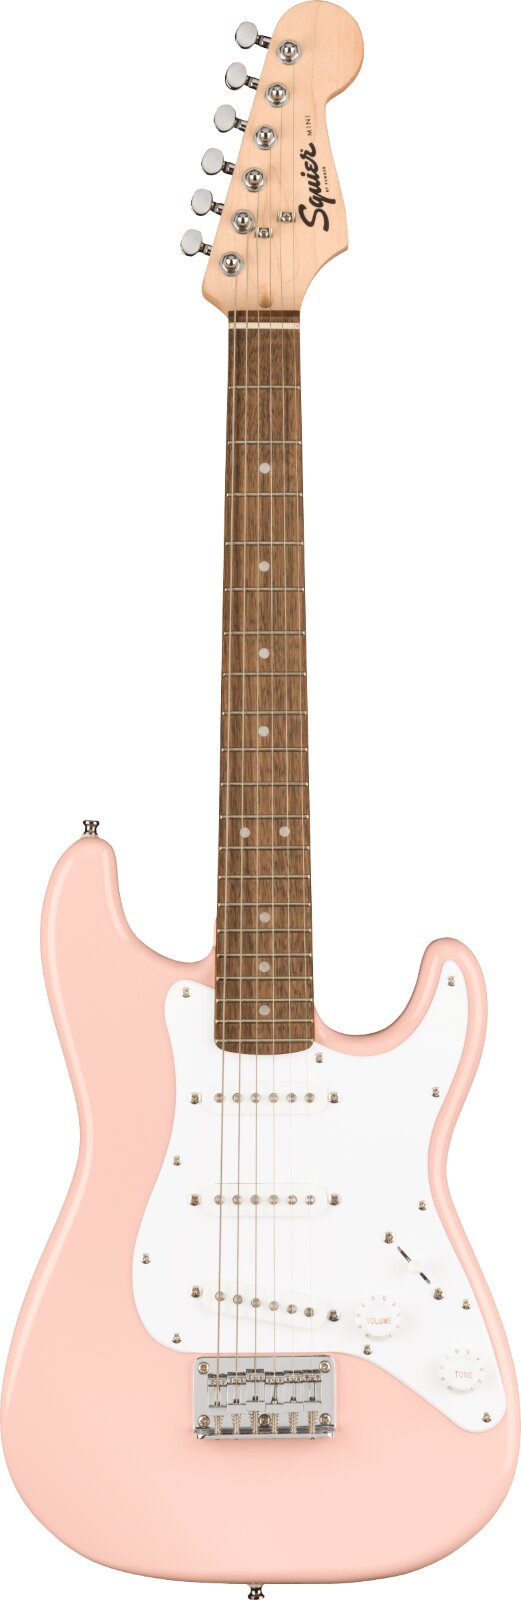 Squier Mini Stratocaster Laurel Fingerboard Shell Pink : photo 1